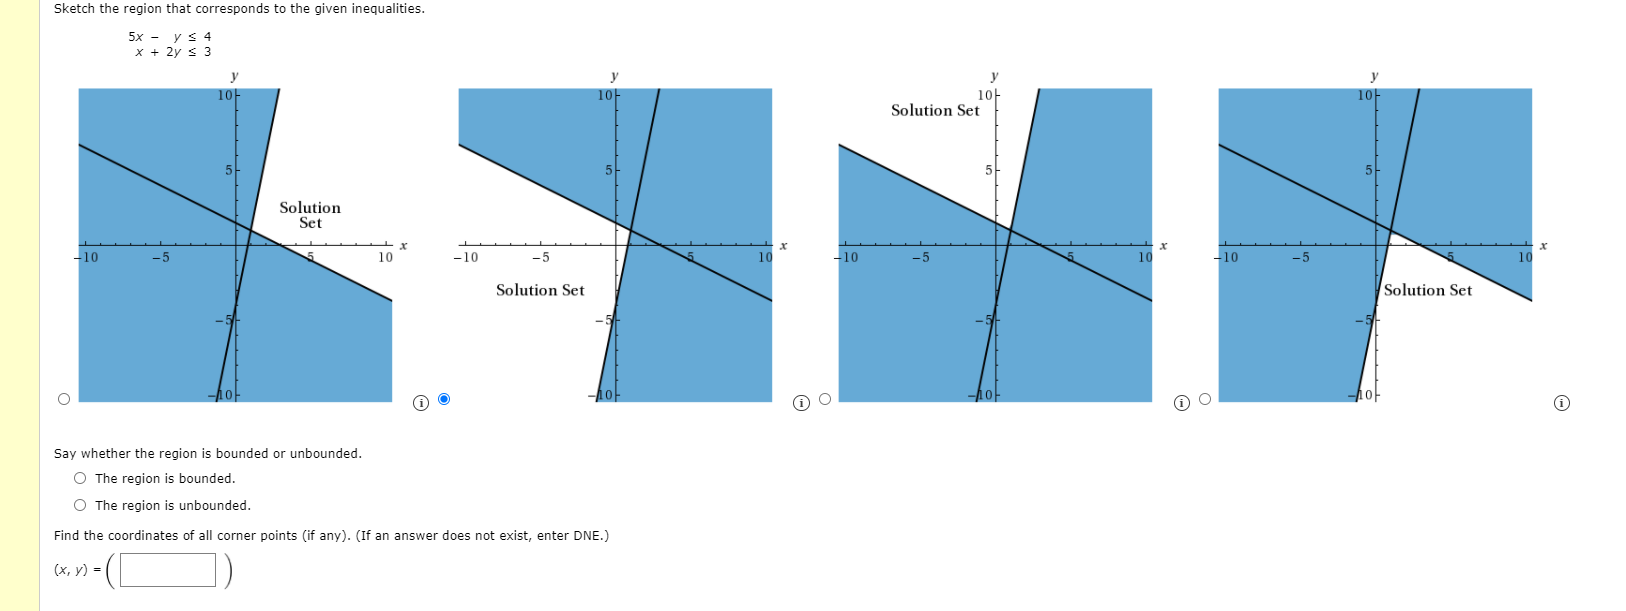 Sketch the region that corresponds to the given inequalities.
5x - y s 4
x + 2y s 3
y
y
y
10
10
10-
Solution Set
Solution
Set
-10
-5
10
-10
10
-10
-5
10
-10
-5
10
Solution Set
Solution Set
10-
Say whether the region is bounded or unbounded.
O The region is bounded.
O The region is unbounded.
Find the coordinates of all corner points (if any). (If an answer does not exist, enter DNE.)
(х, у) -
